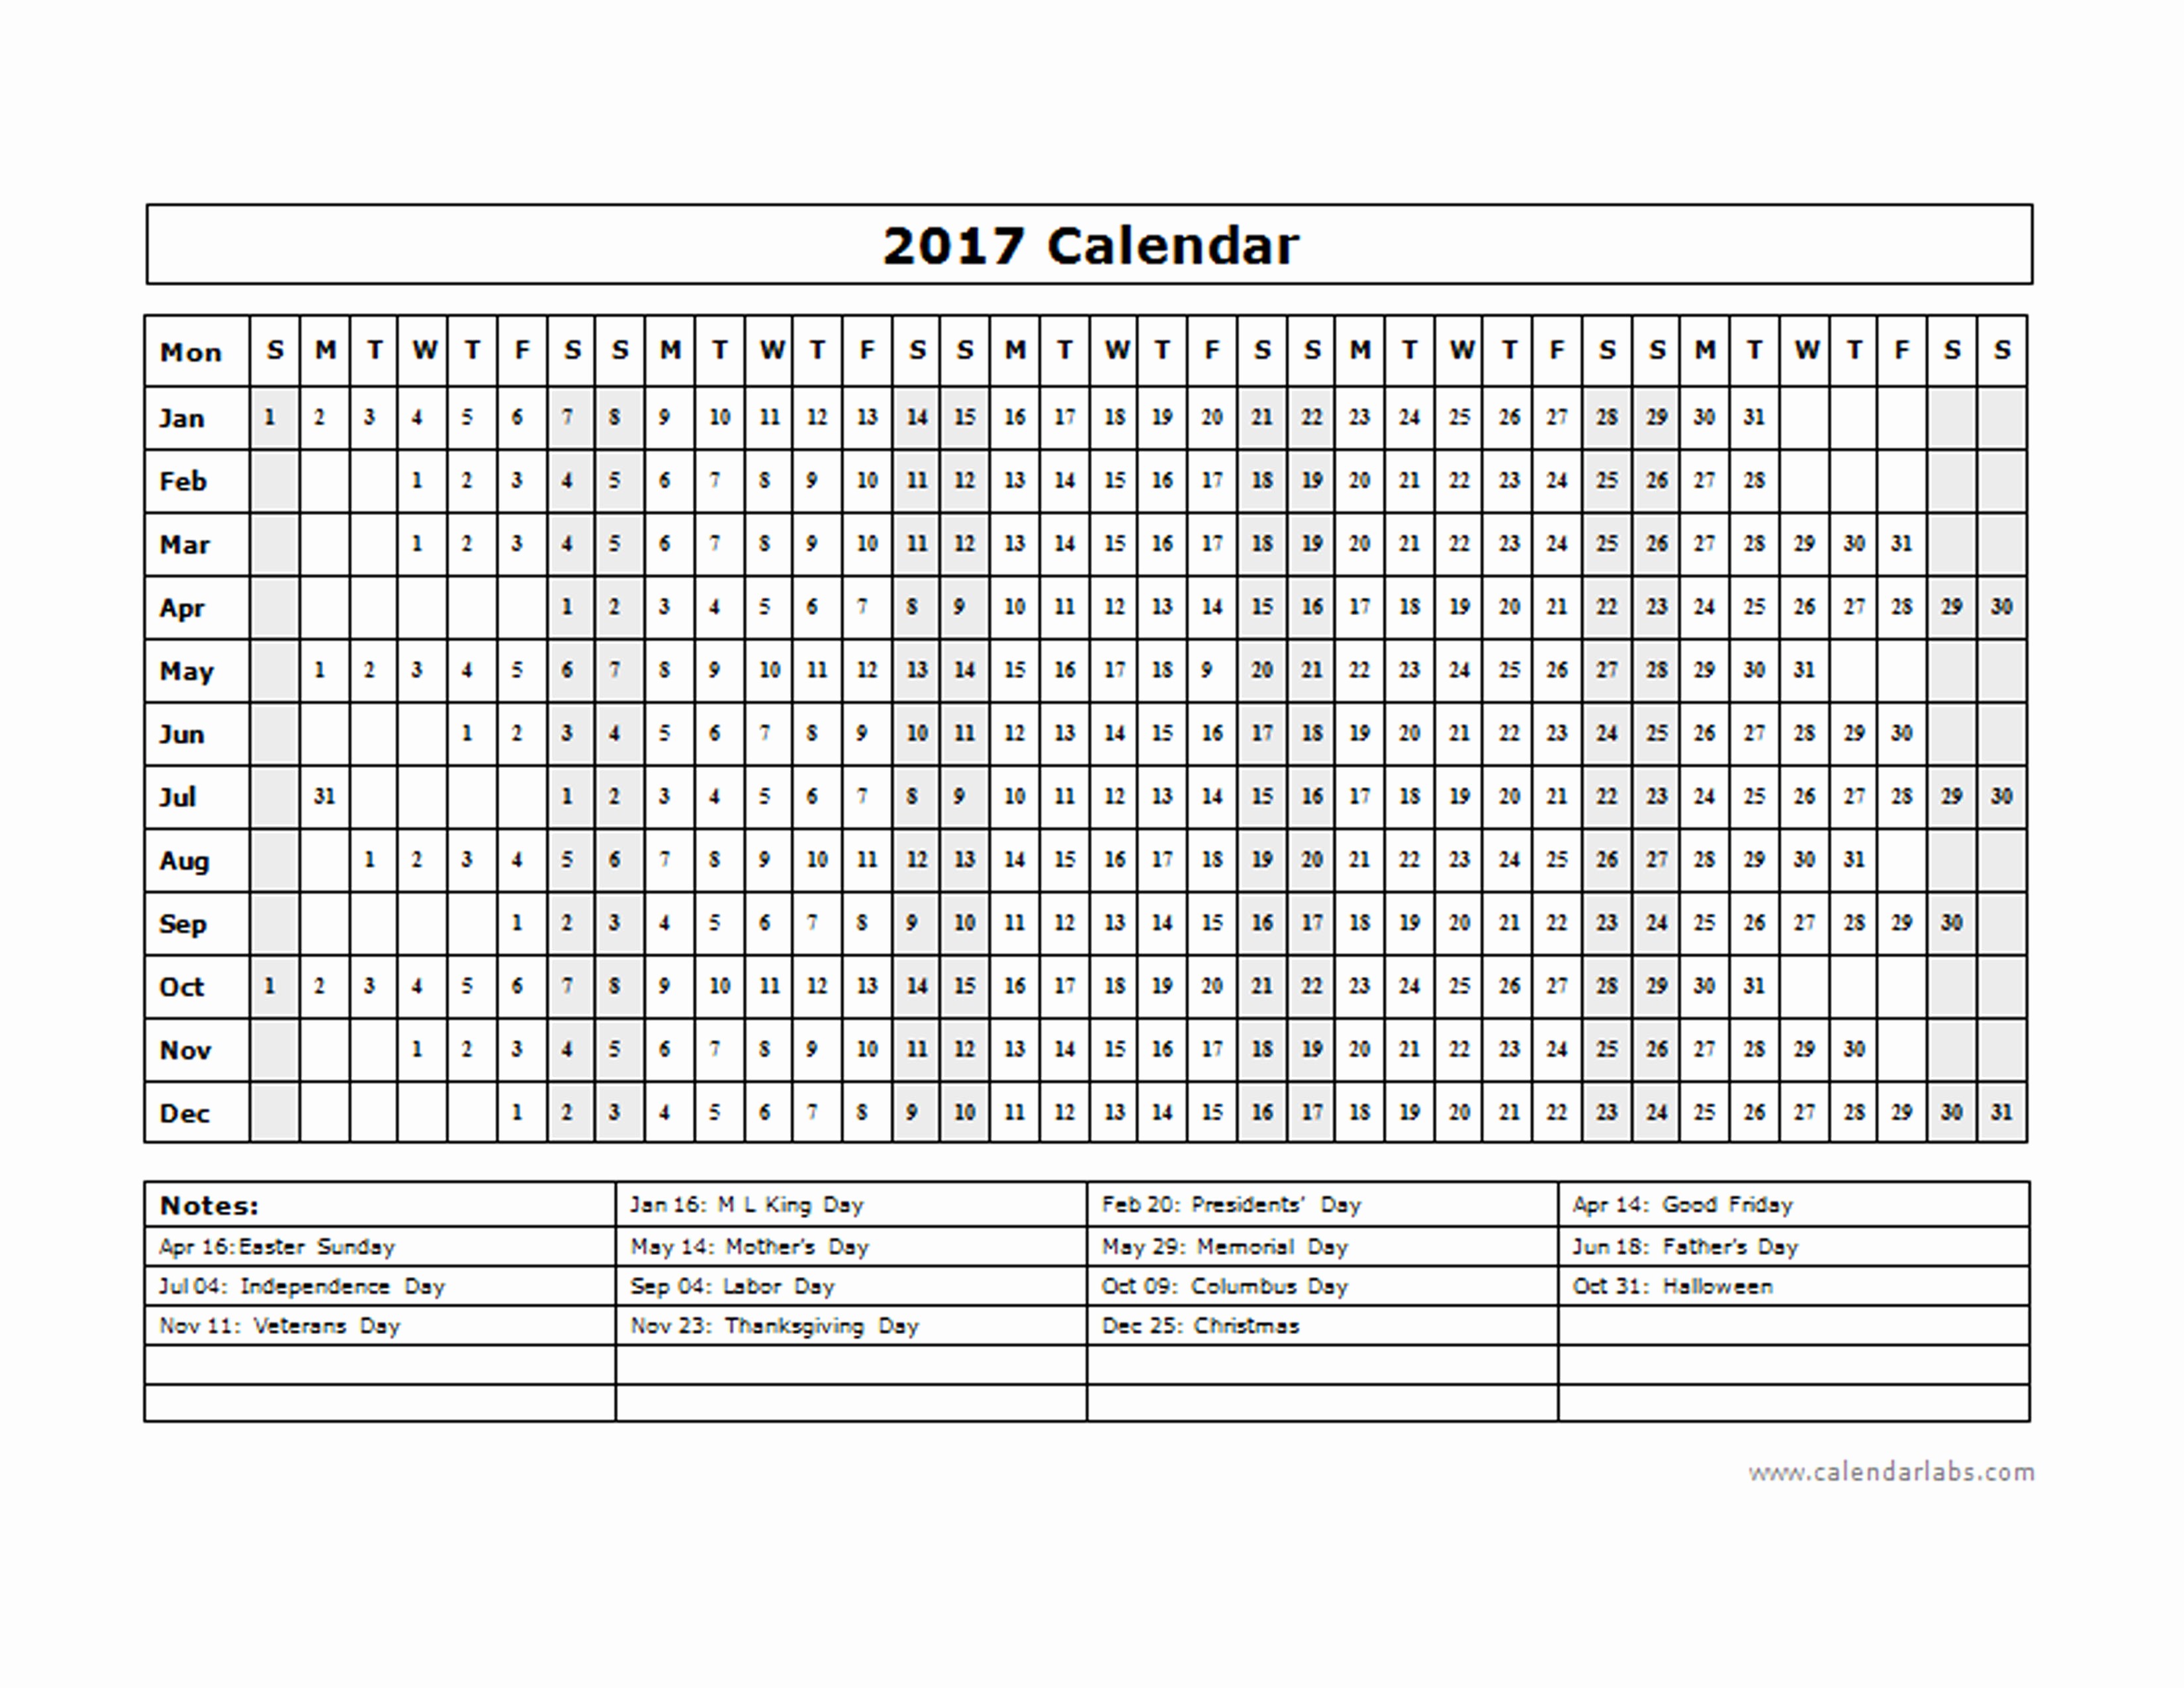 A Year at A Glance Unique 2017 Calendar Template Year at A Glance Free Printable